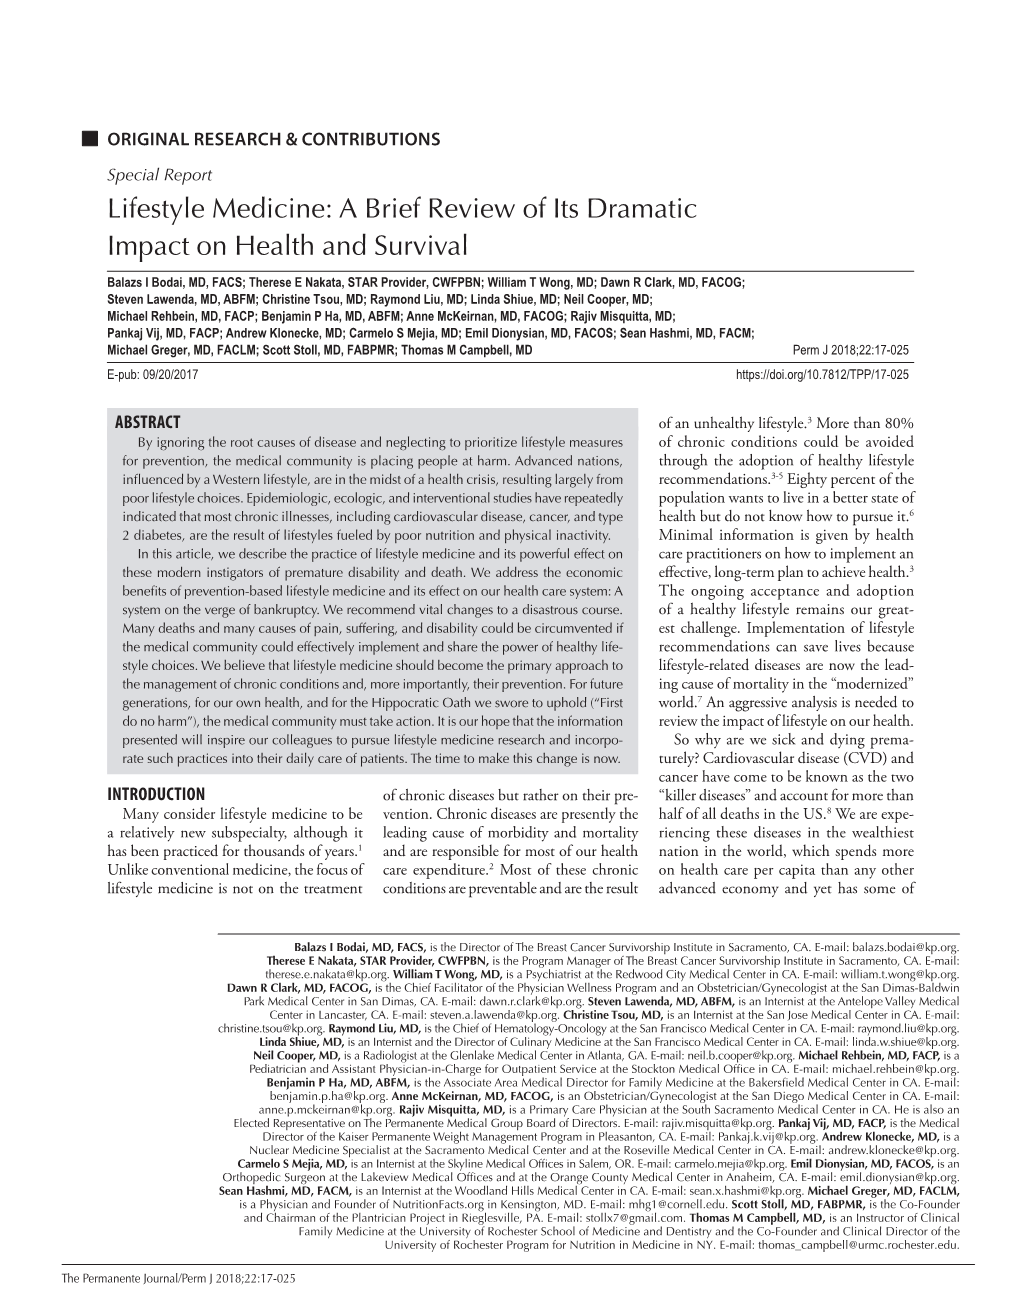 Lifestyle Medicine: a Brief Review of Its Dramatic Impact on Health and Survival